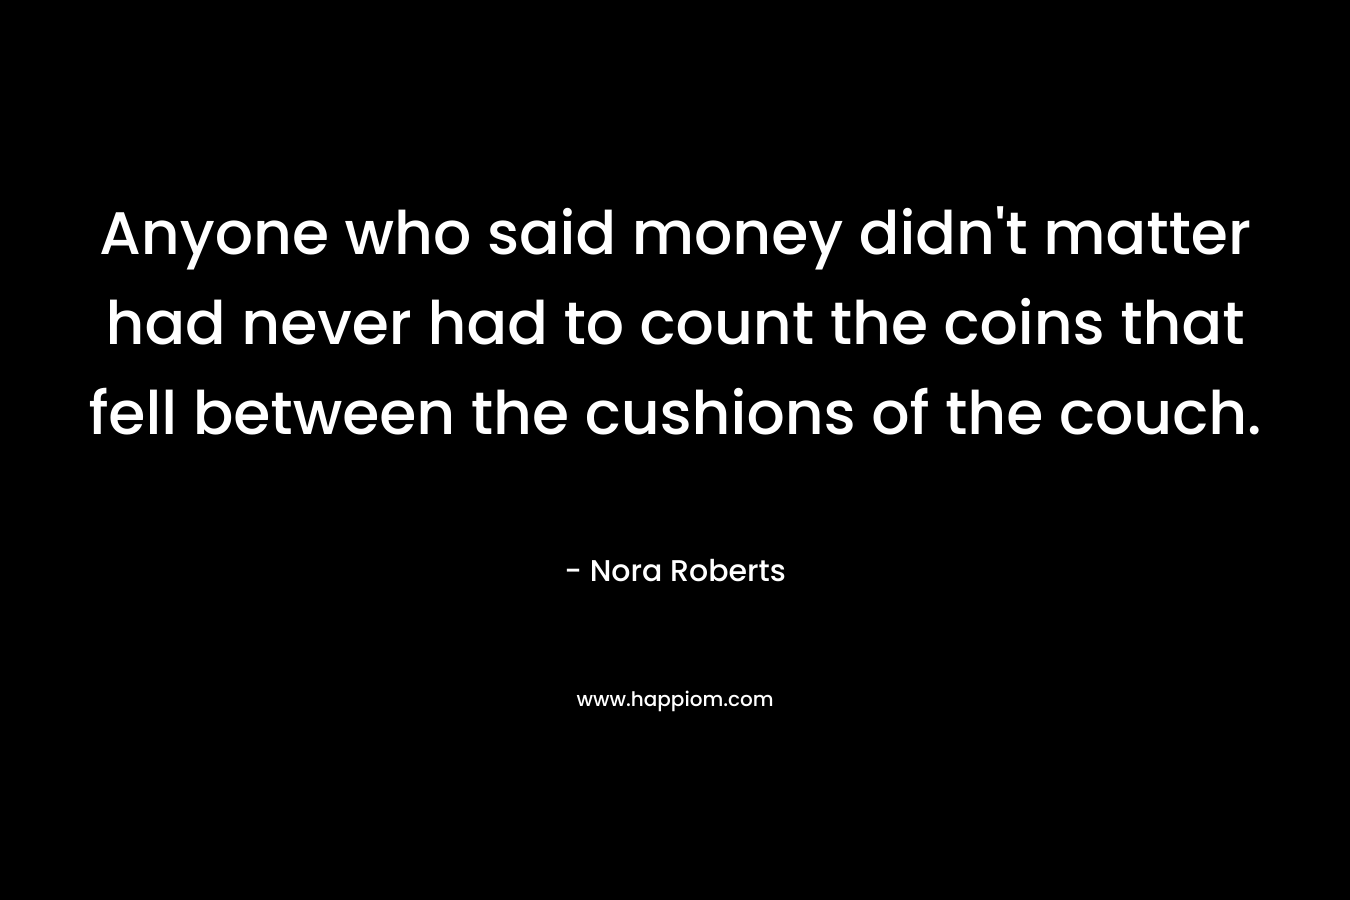 Anyone who said money didn’t matter had never had to count the coins that fell between the cushions of the couch. – Nora Roberts